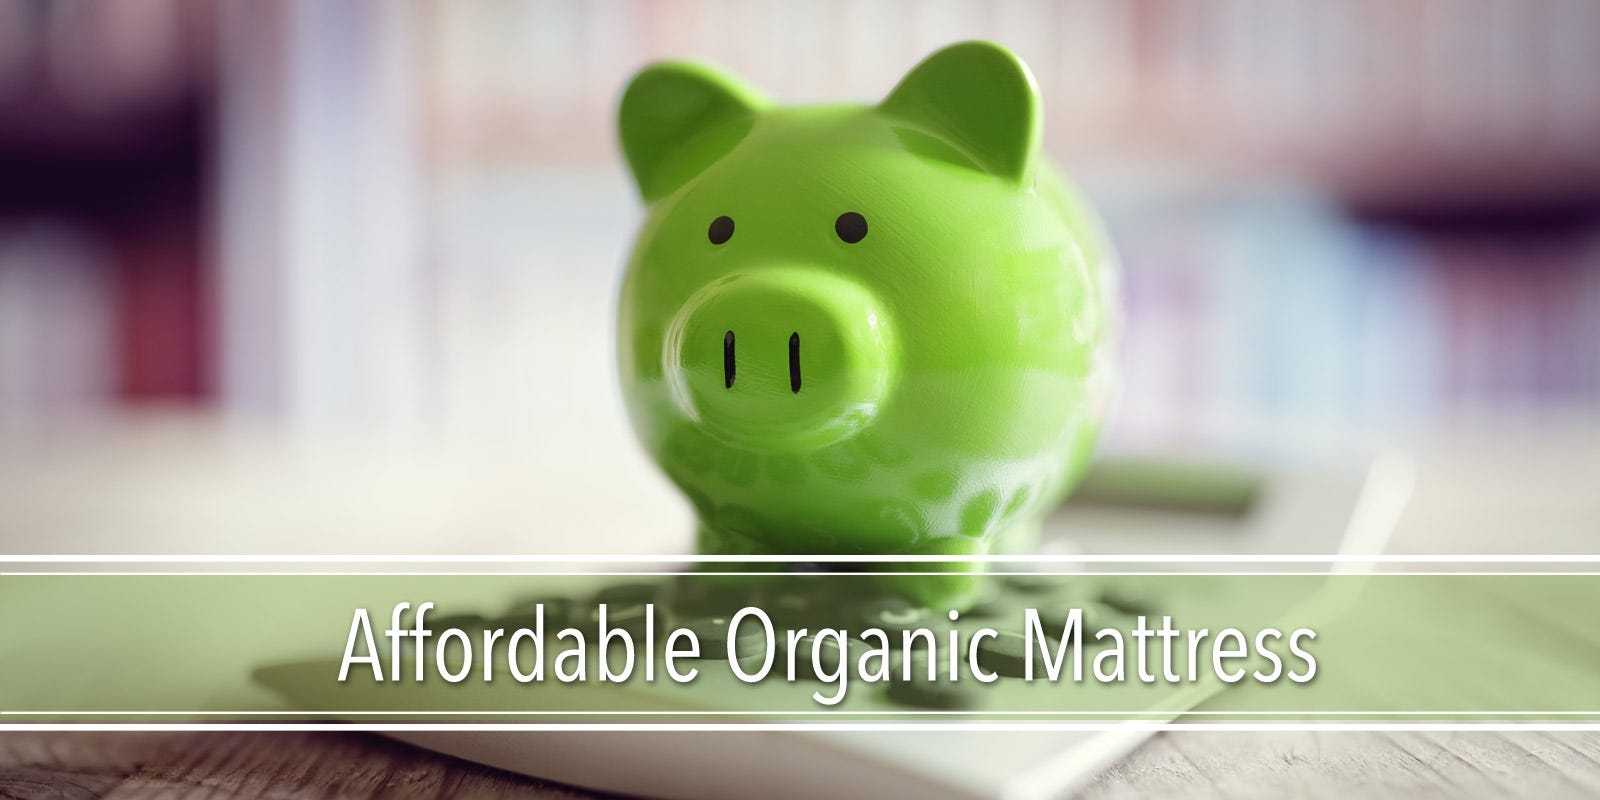 What Is The Most Affordable Organic Mattress?